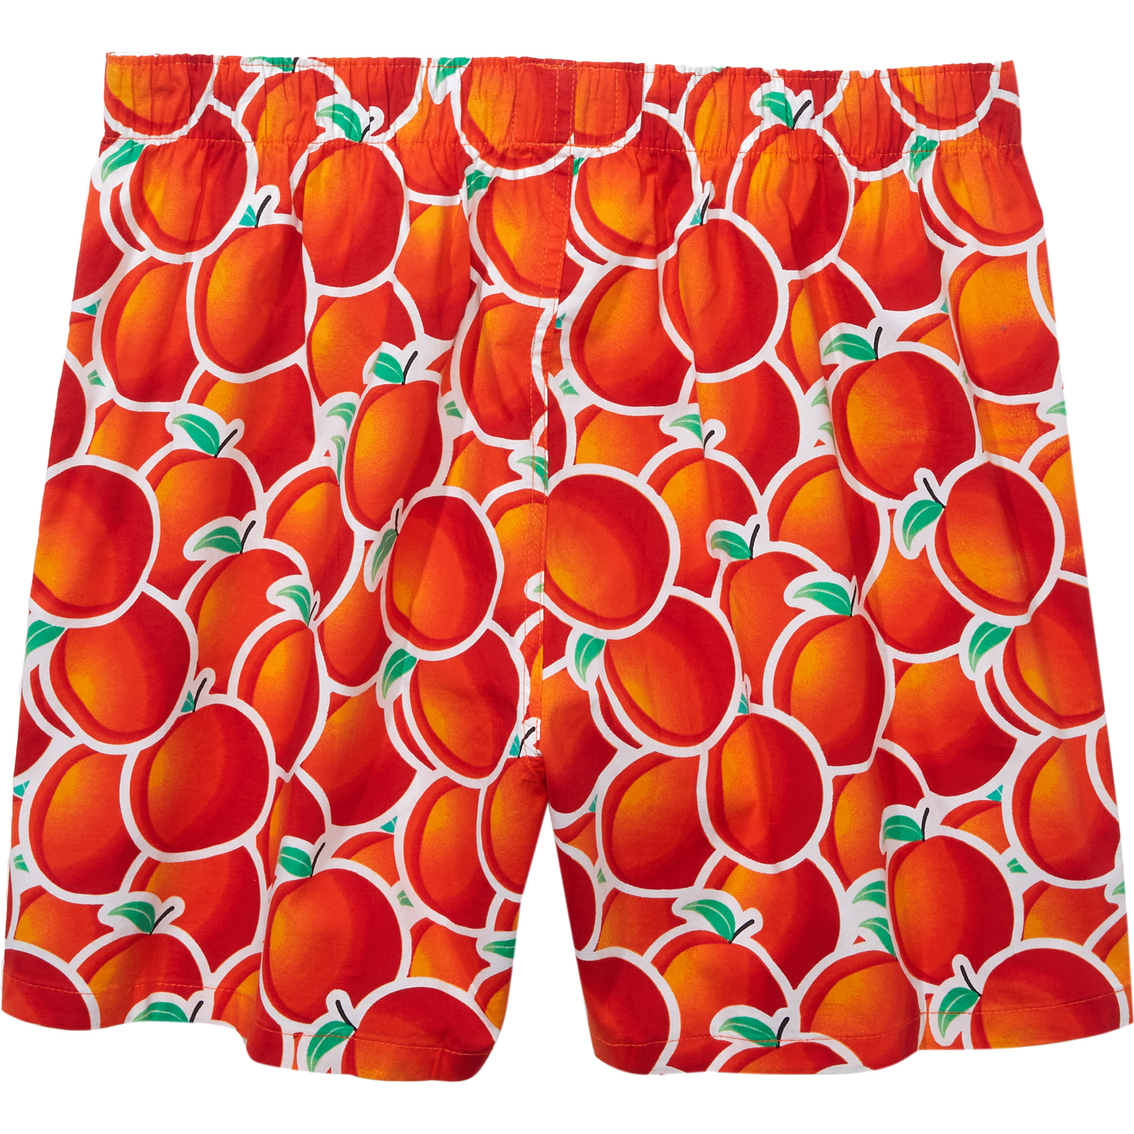 American Eagle Aeo Peaches Stretch Boxer Shorts | Underwear | Clothing ...